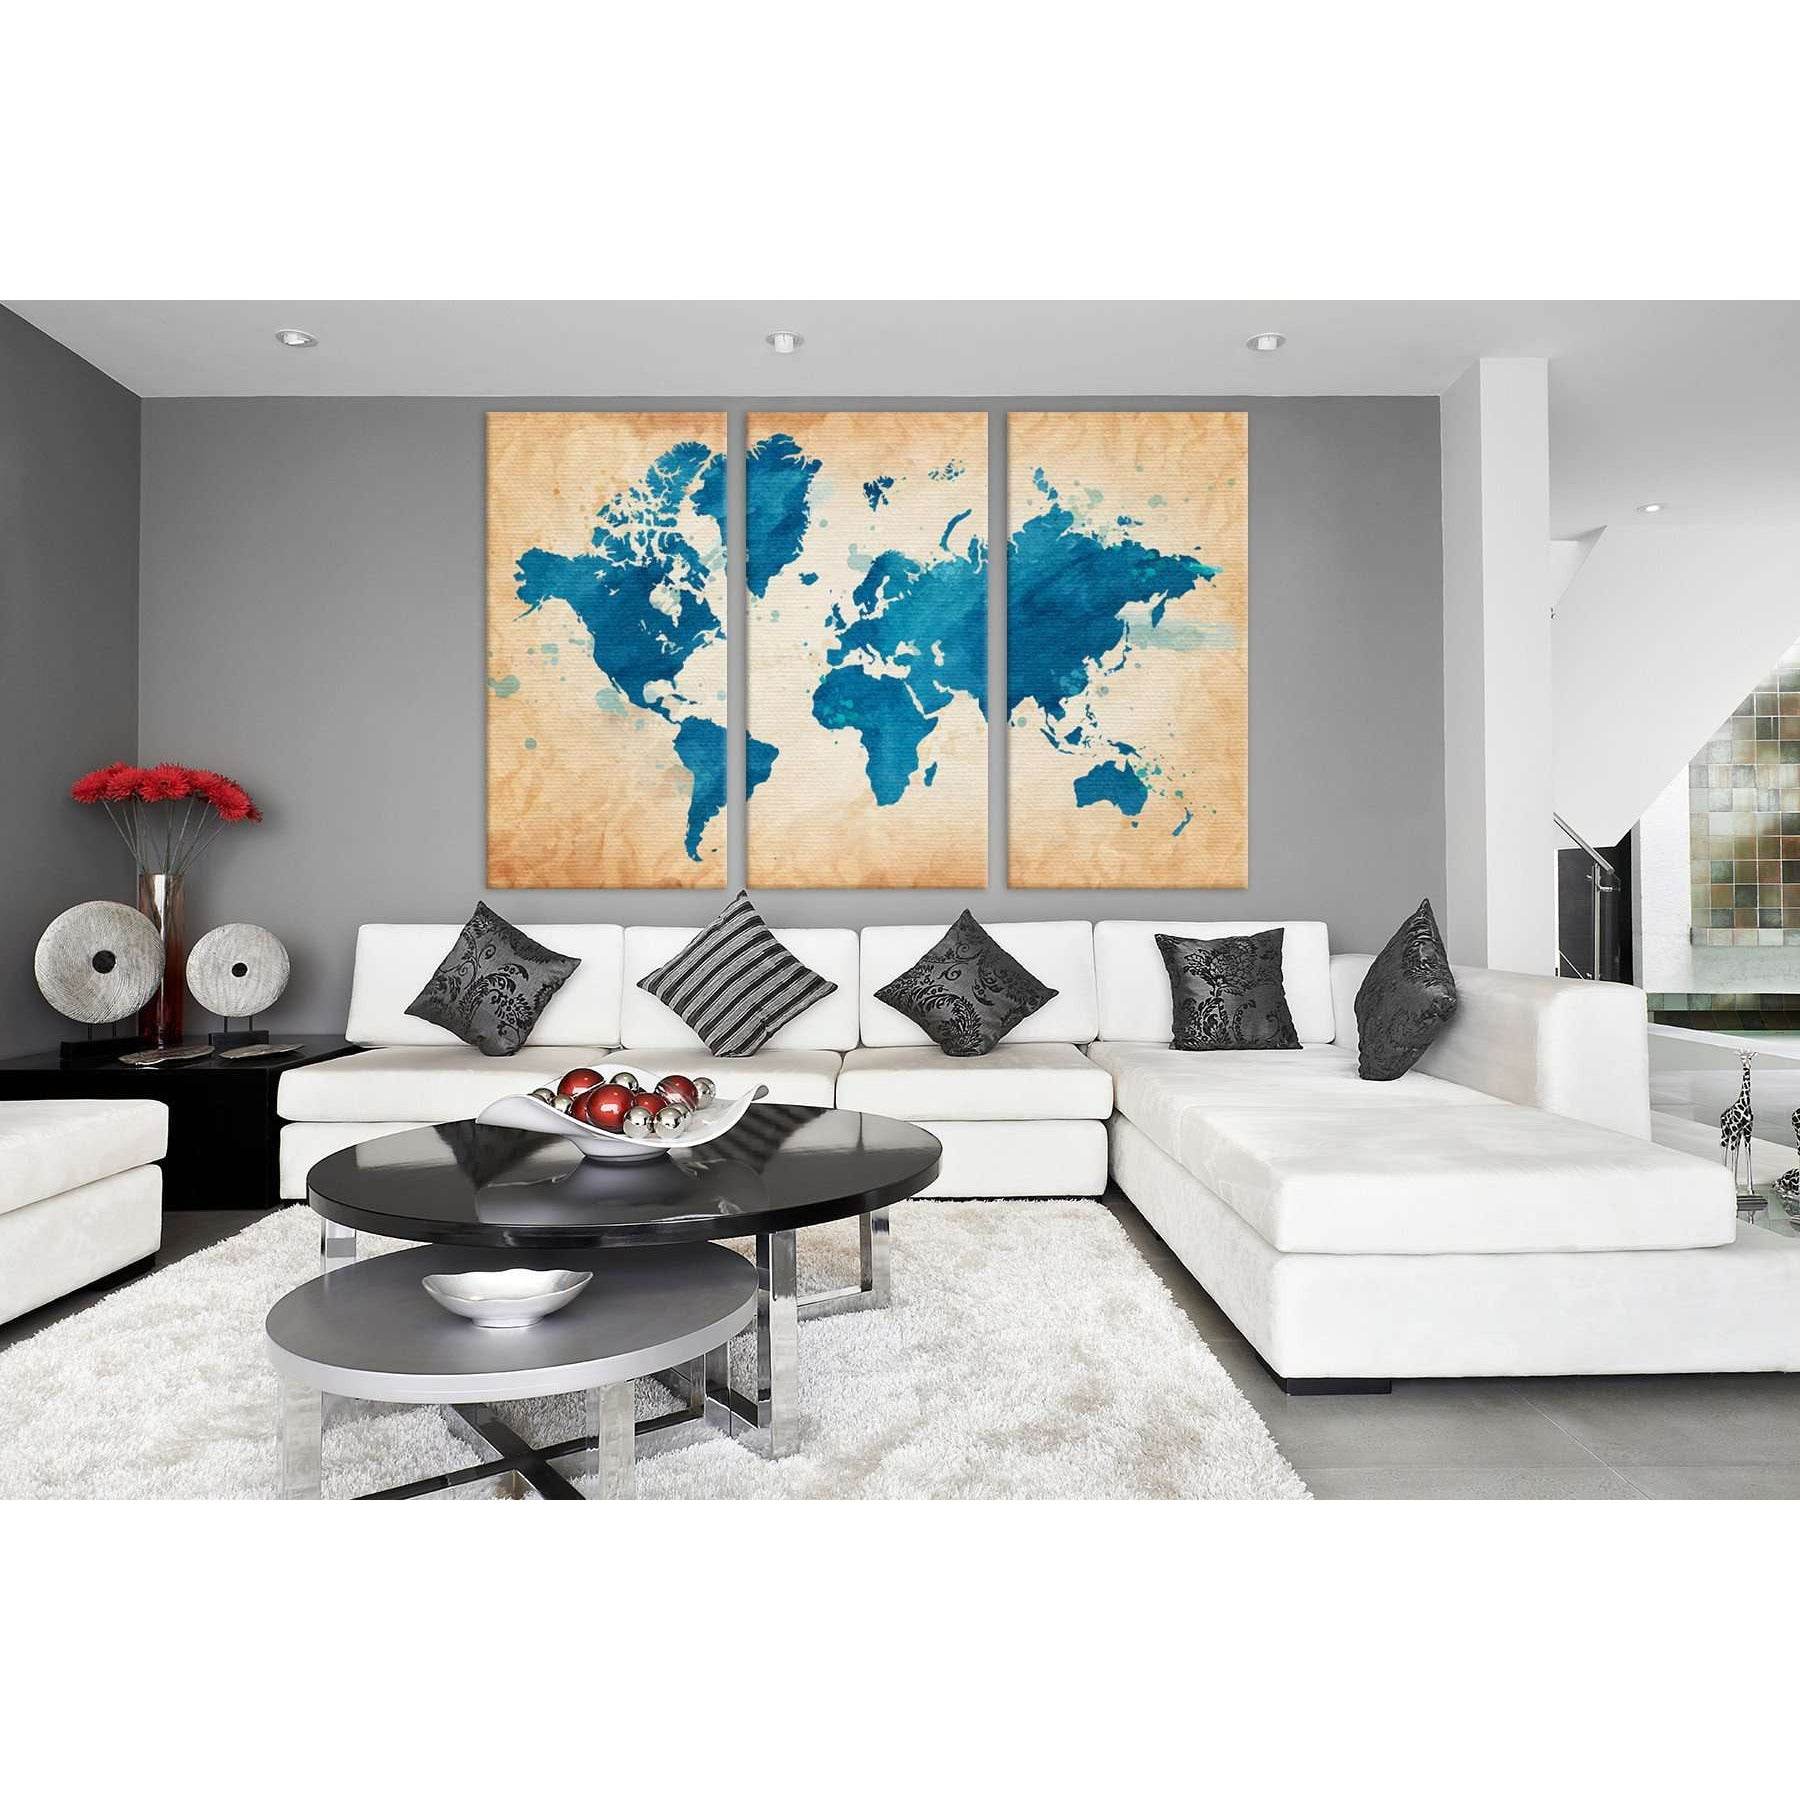 World Map for Home Office Wall DecorationDecorate your walls with a stunning World Map Canvas Art Print from the world's largest art gallery. Choose from thousands of Map artworks with various sizing options. Choose your perfect art print to complete your